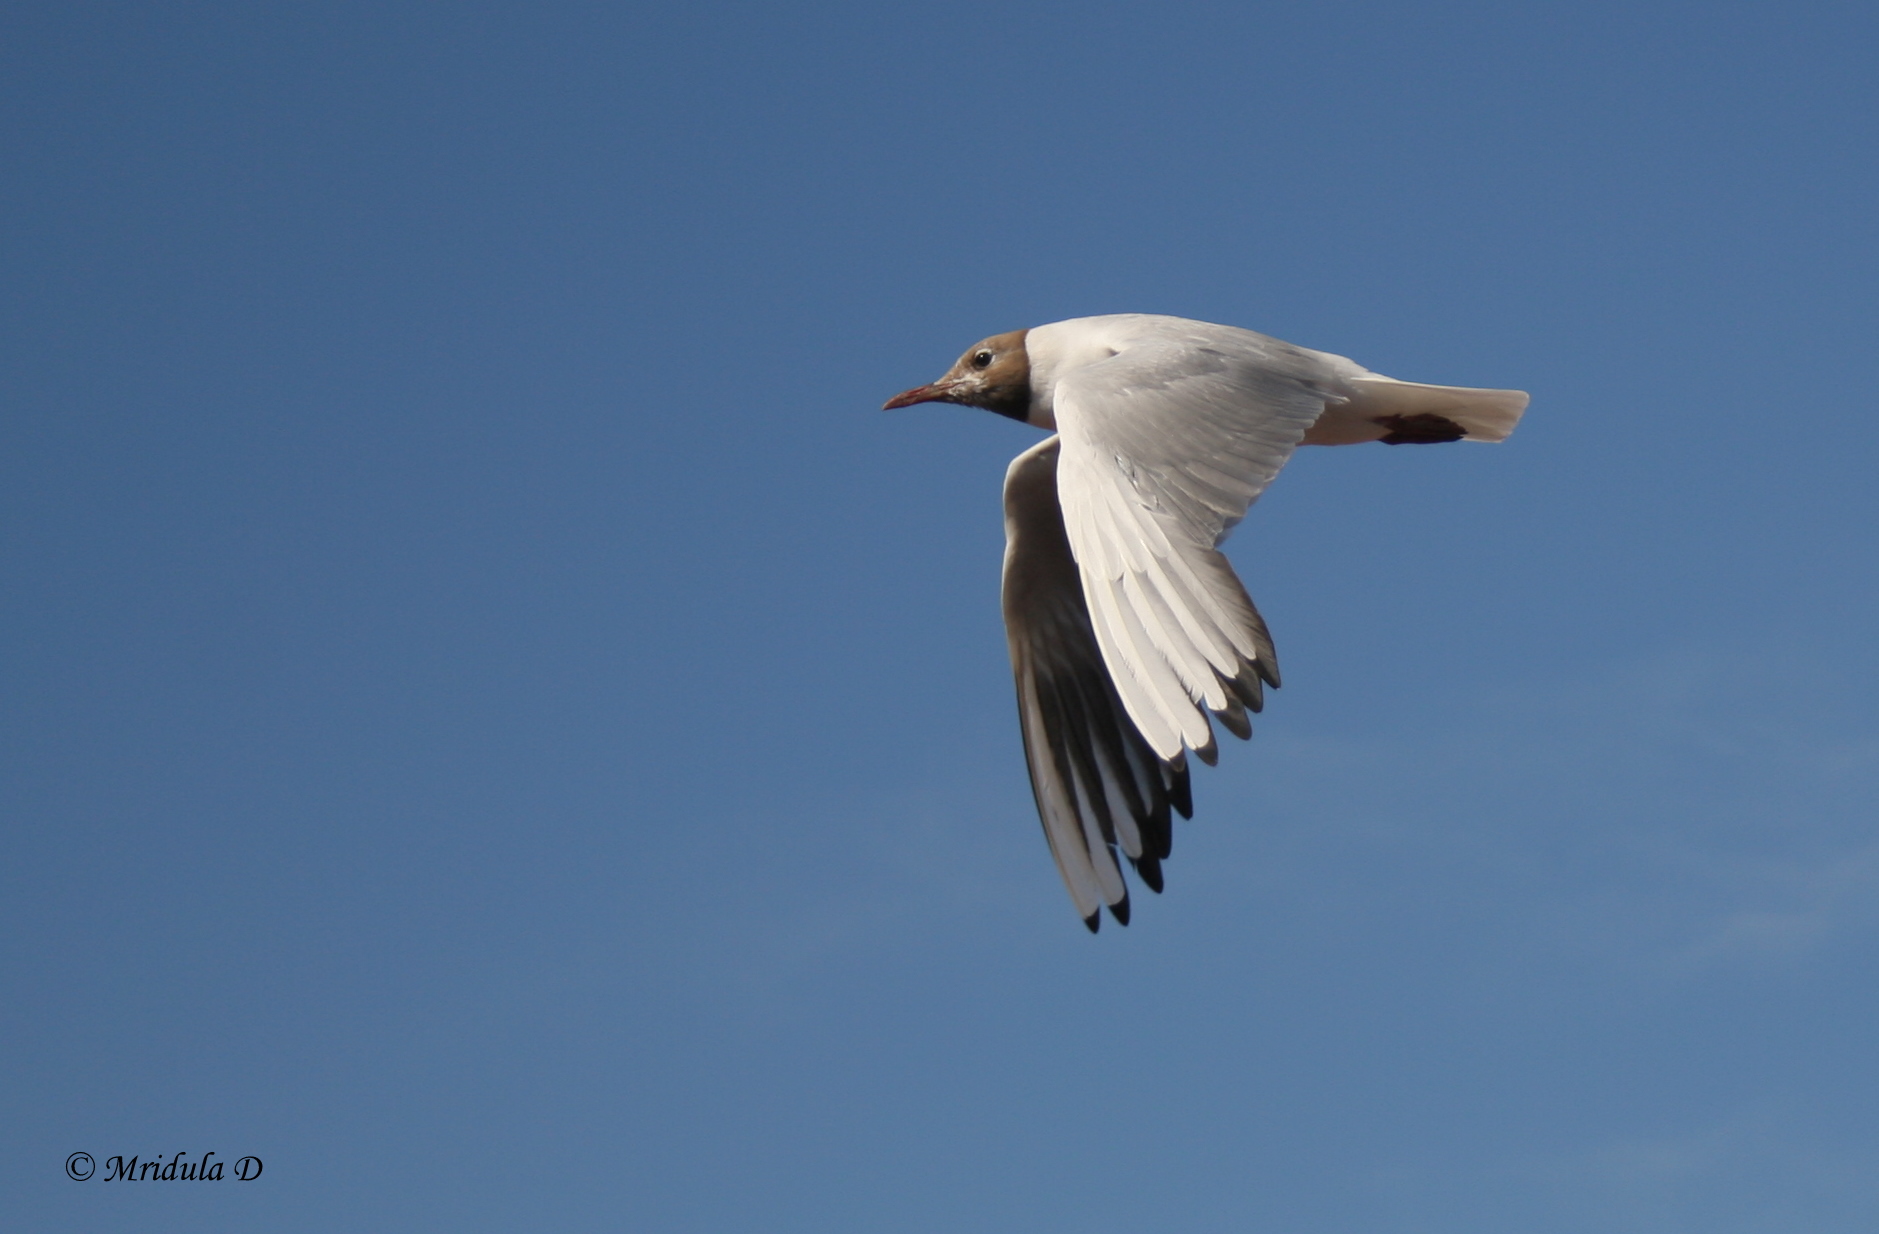 A Seagull in Flight, Morecambe, UK